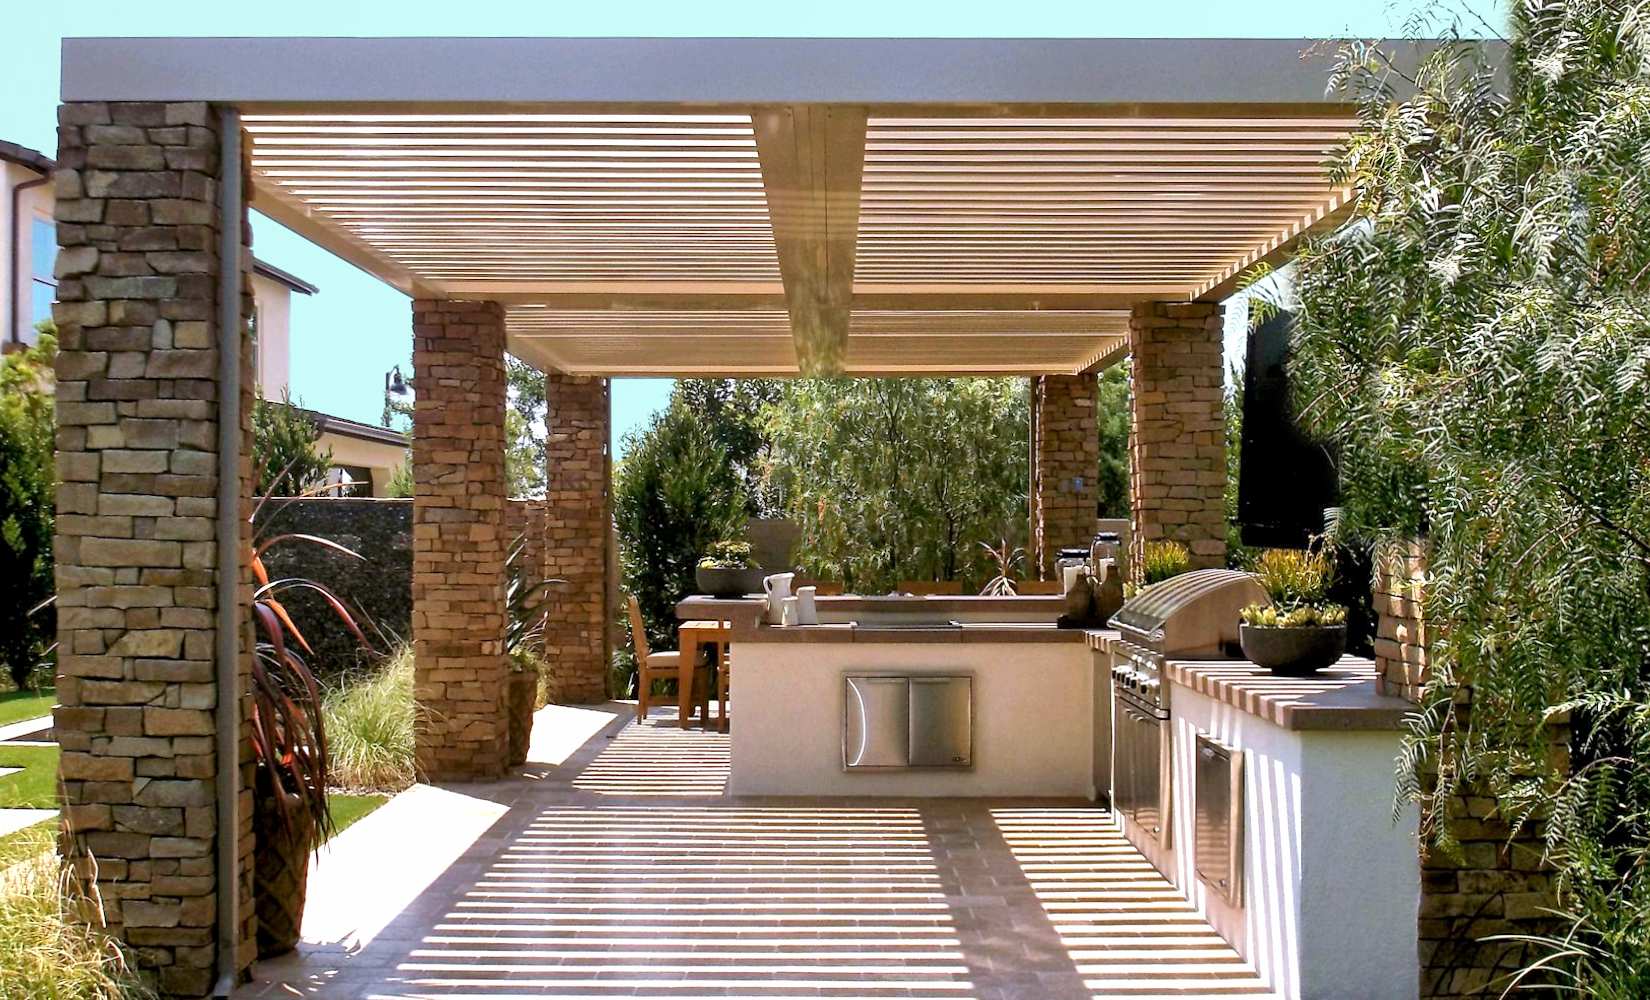 Patio Covers Enclosures Artechroofing in dimensions 1650 X 1000